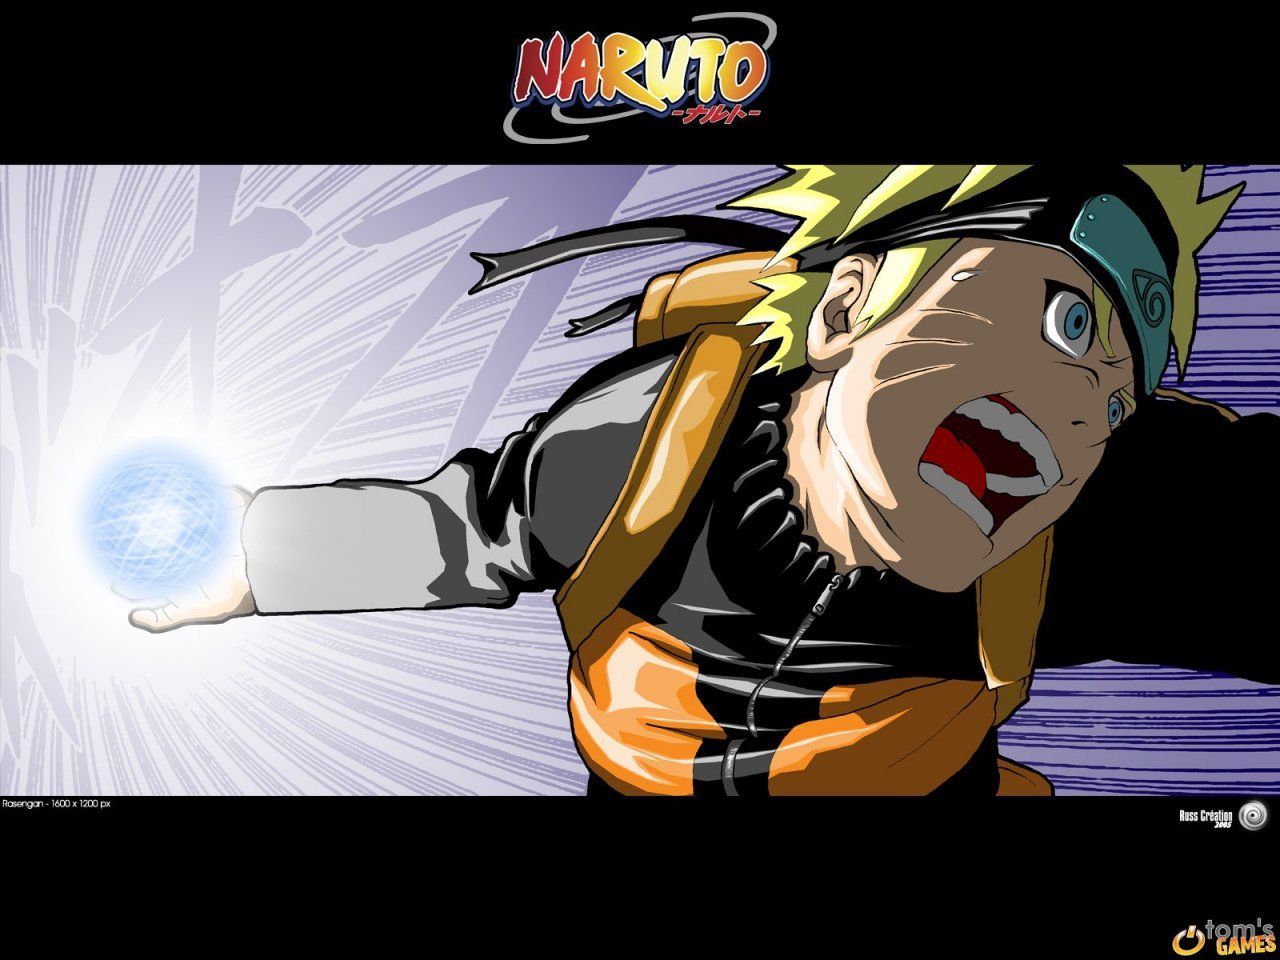 how many episodes in the original naruto